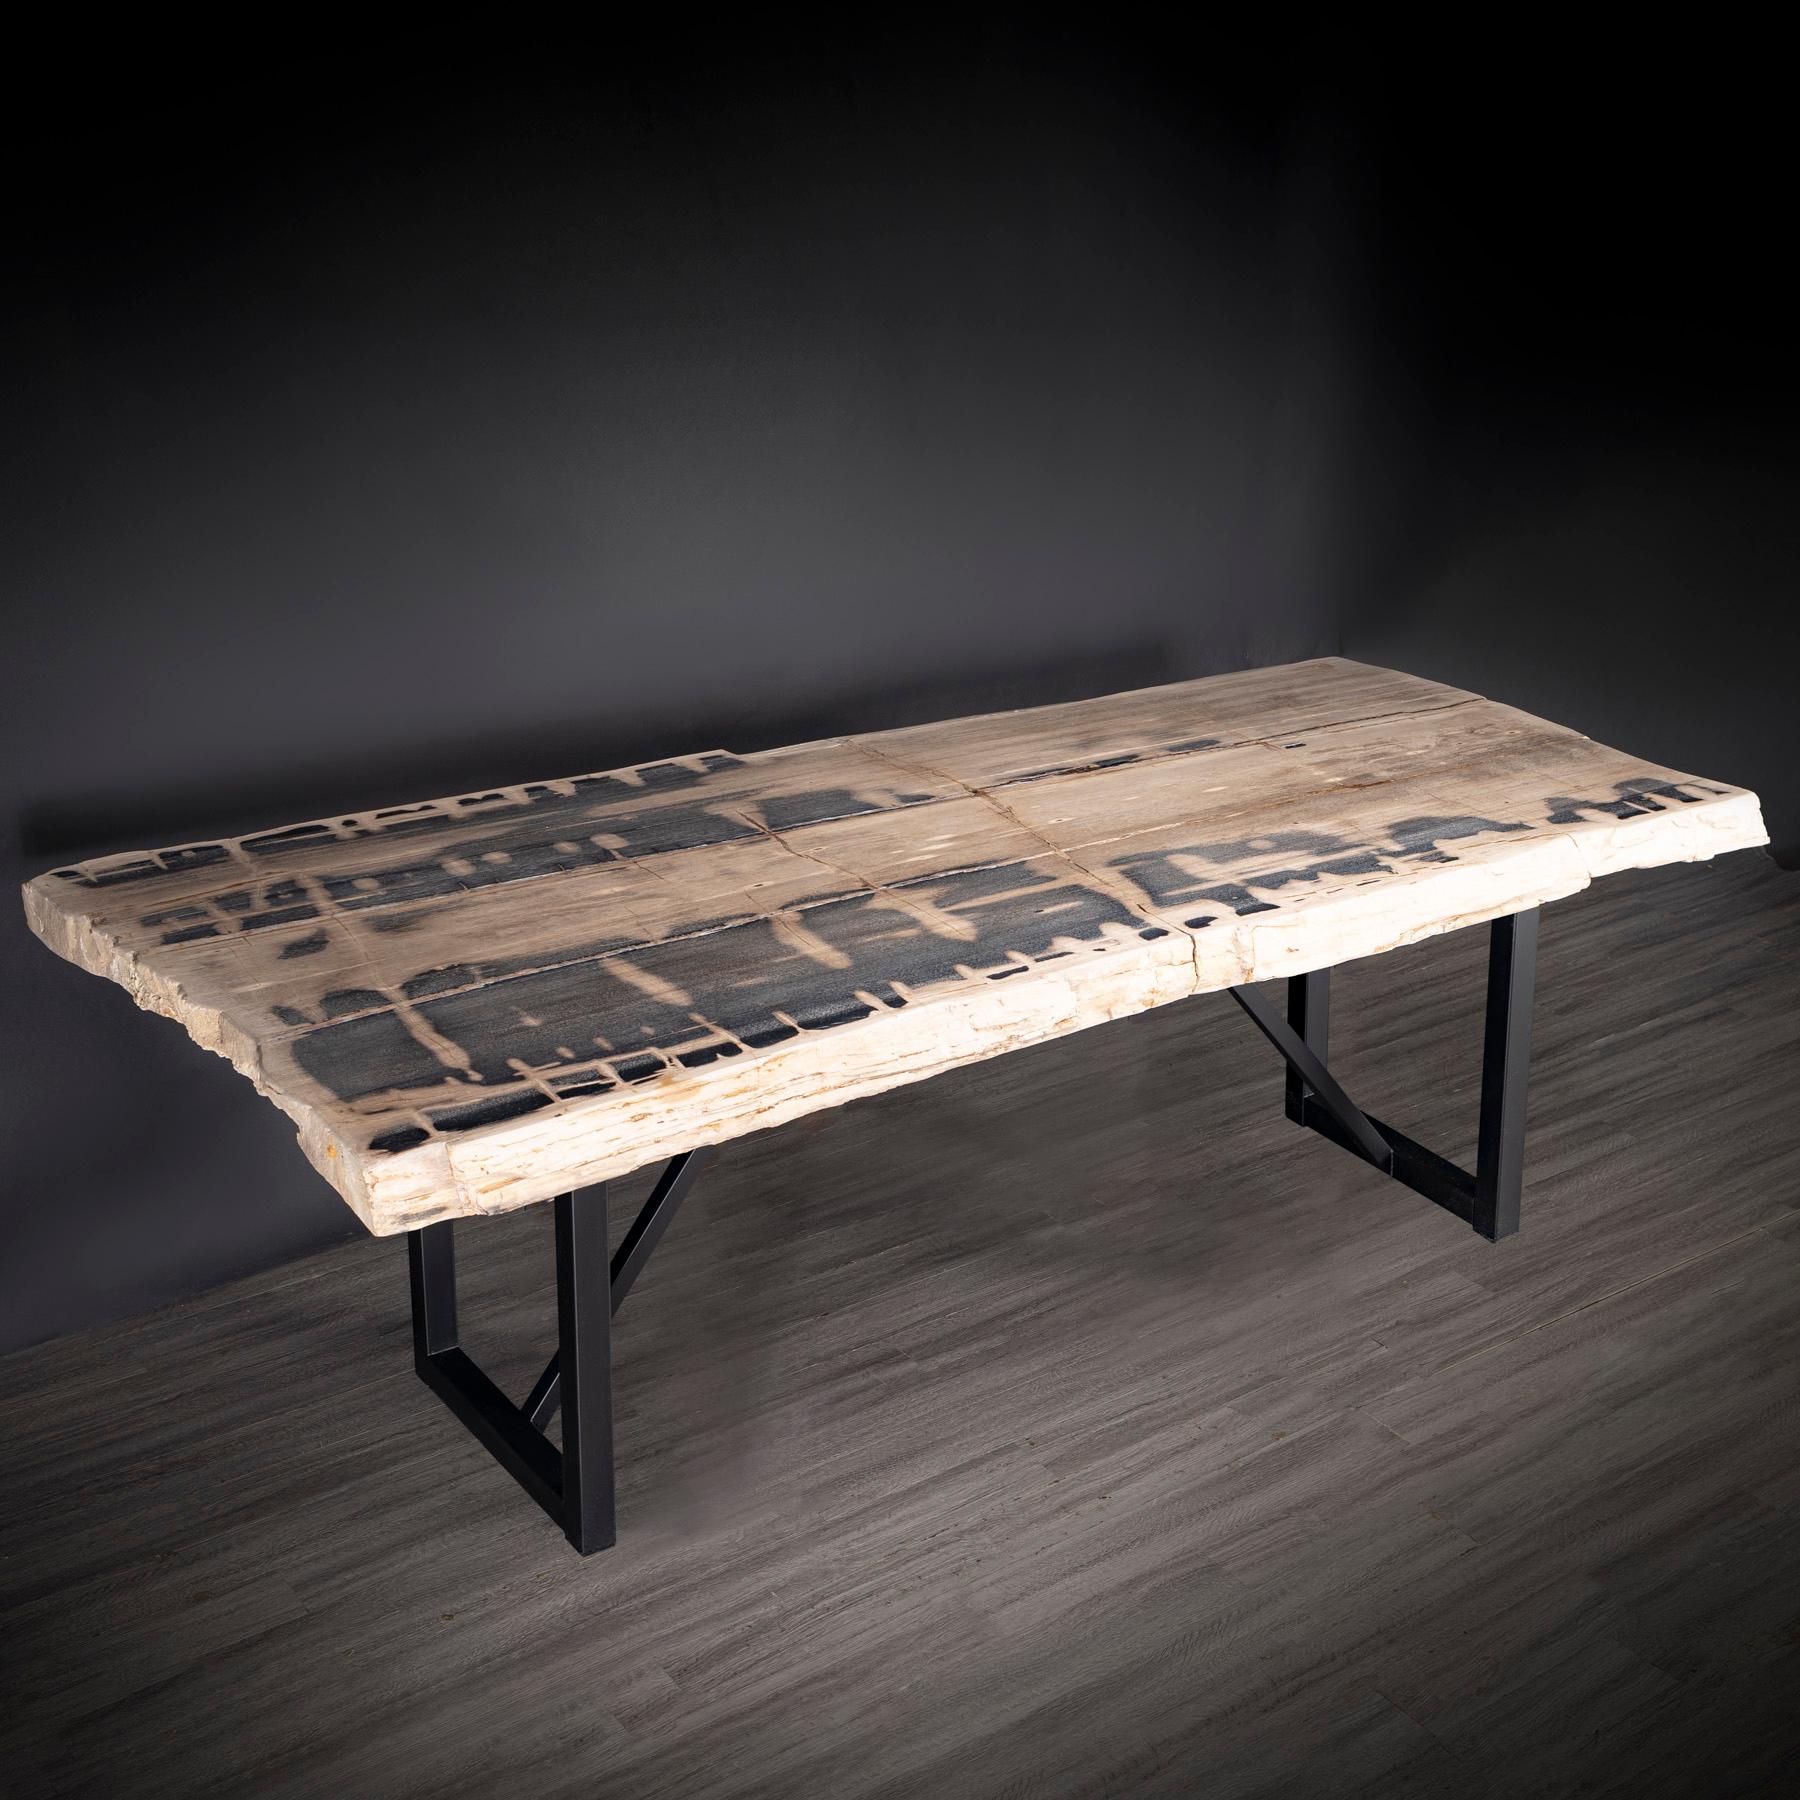 petrified wood dining table